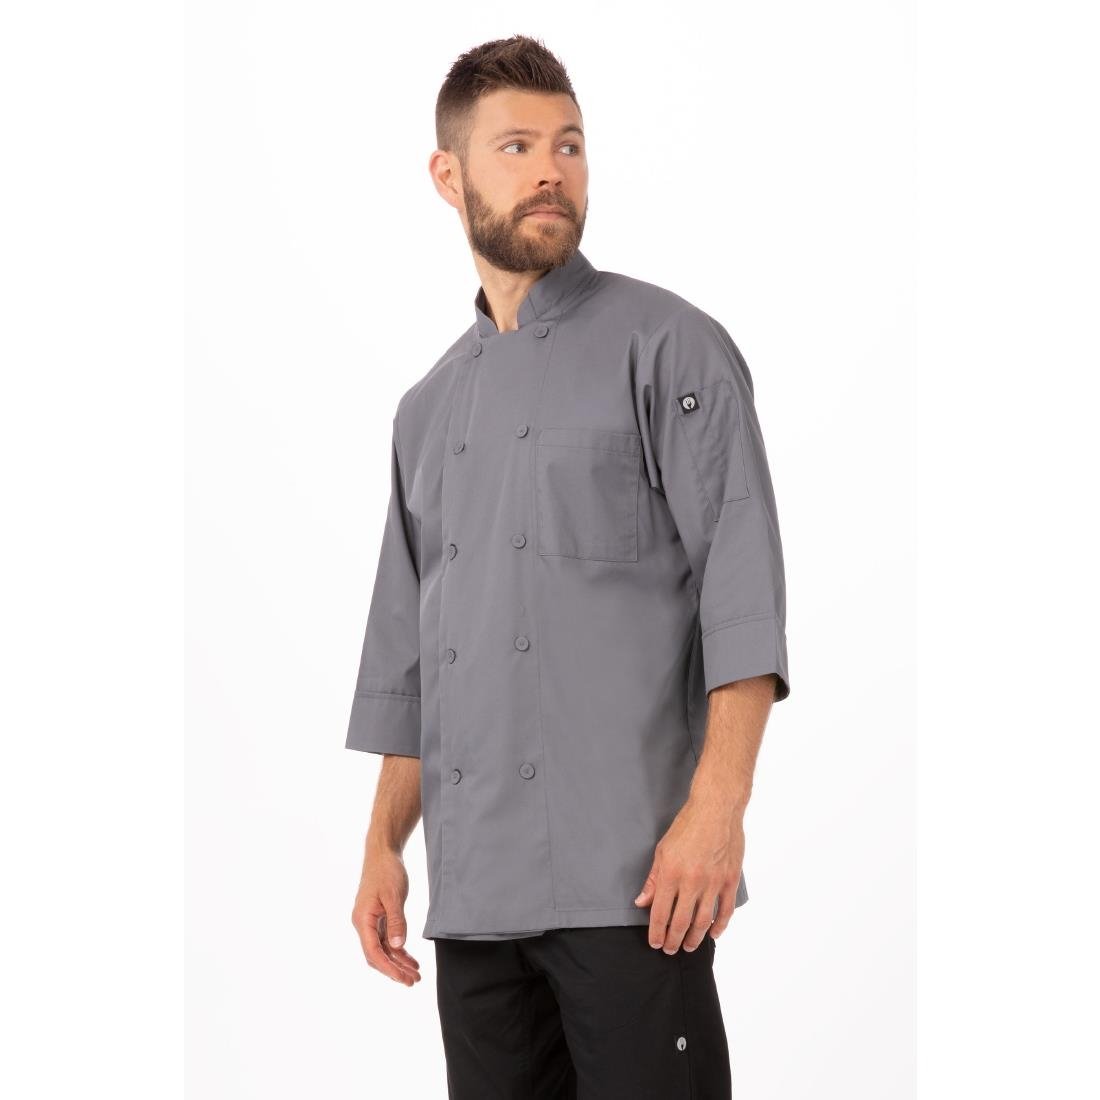 A934-XL Chef Works Unisex Chefs Jacket Grey XL JD Catering Equipment Solutions Ltd